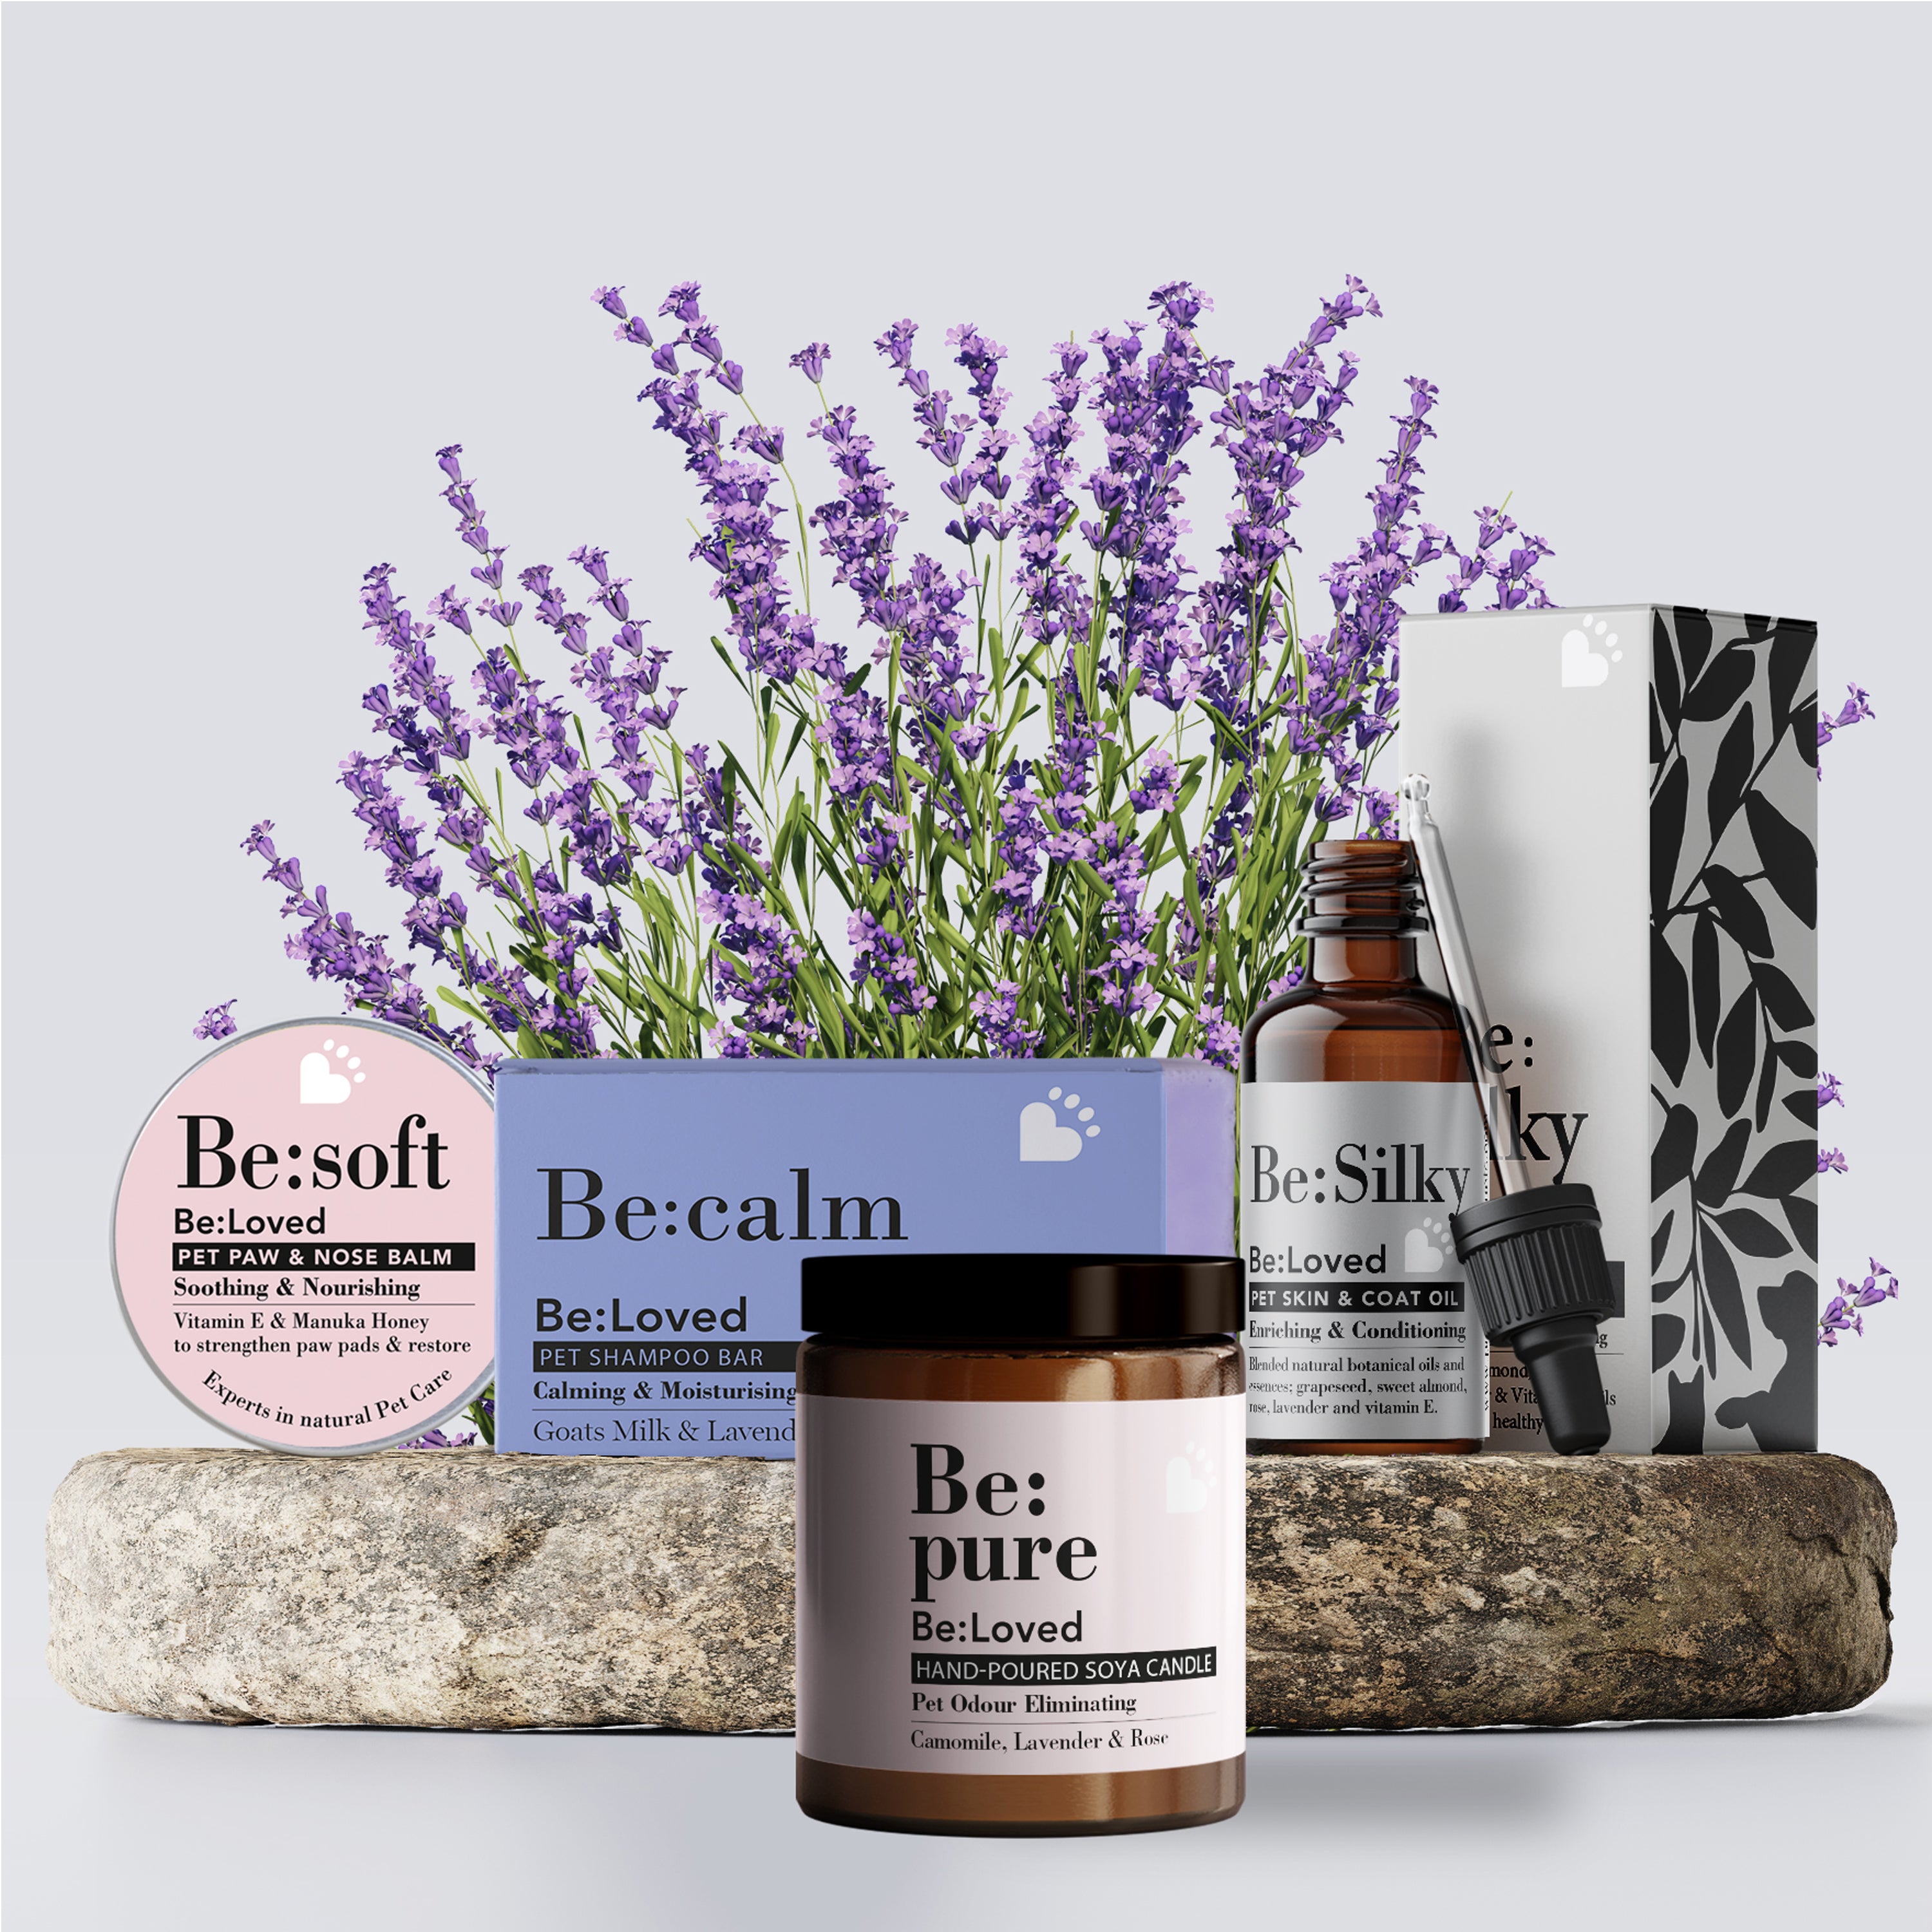 The Be:Calm Gift Bundle